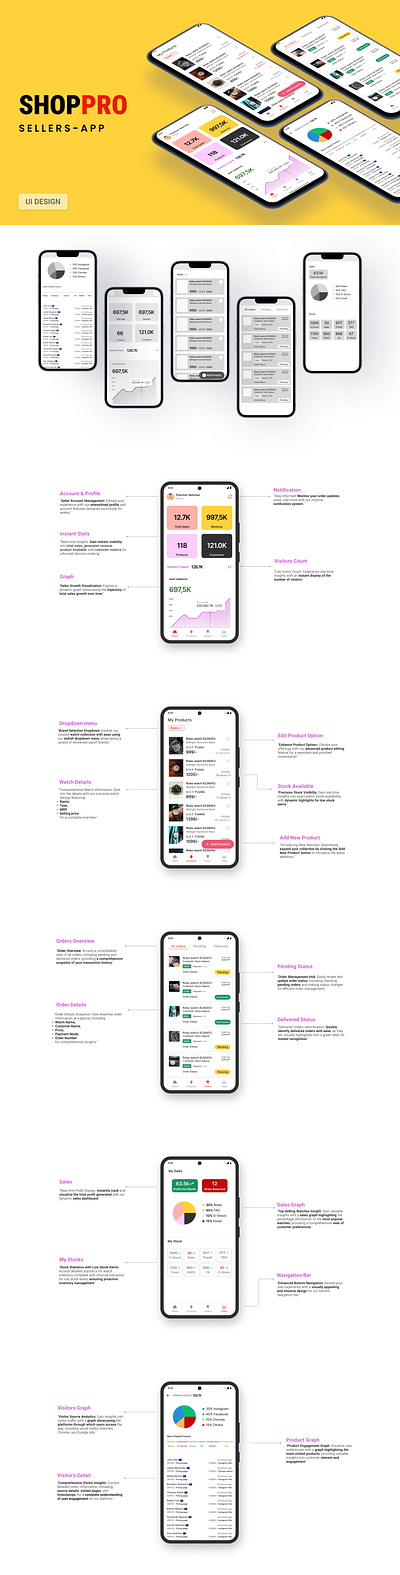 SHOPPRO : Sellers-App app case study e commerce figma mobile design online product prototype sellers selling ui user experience user interface ux yellow